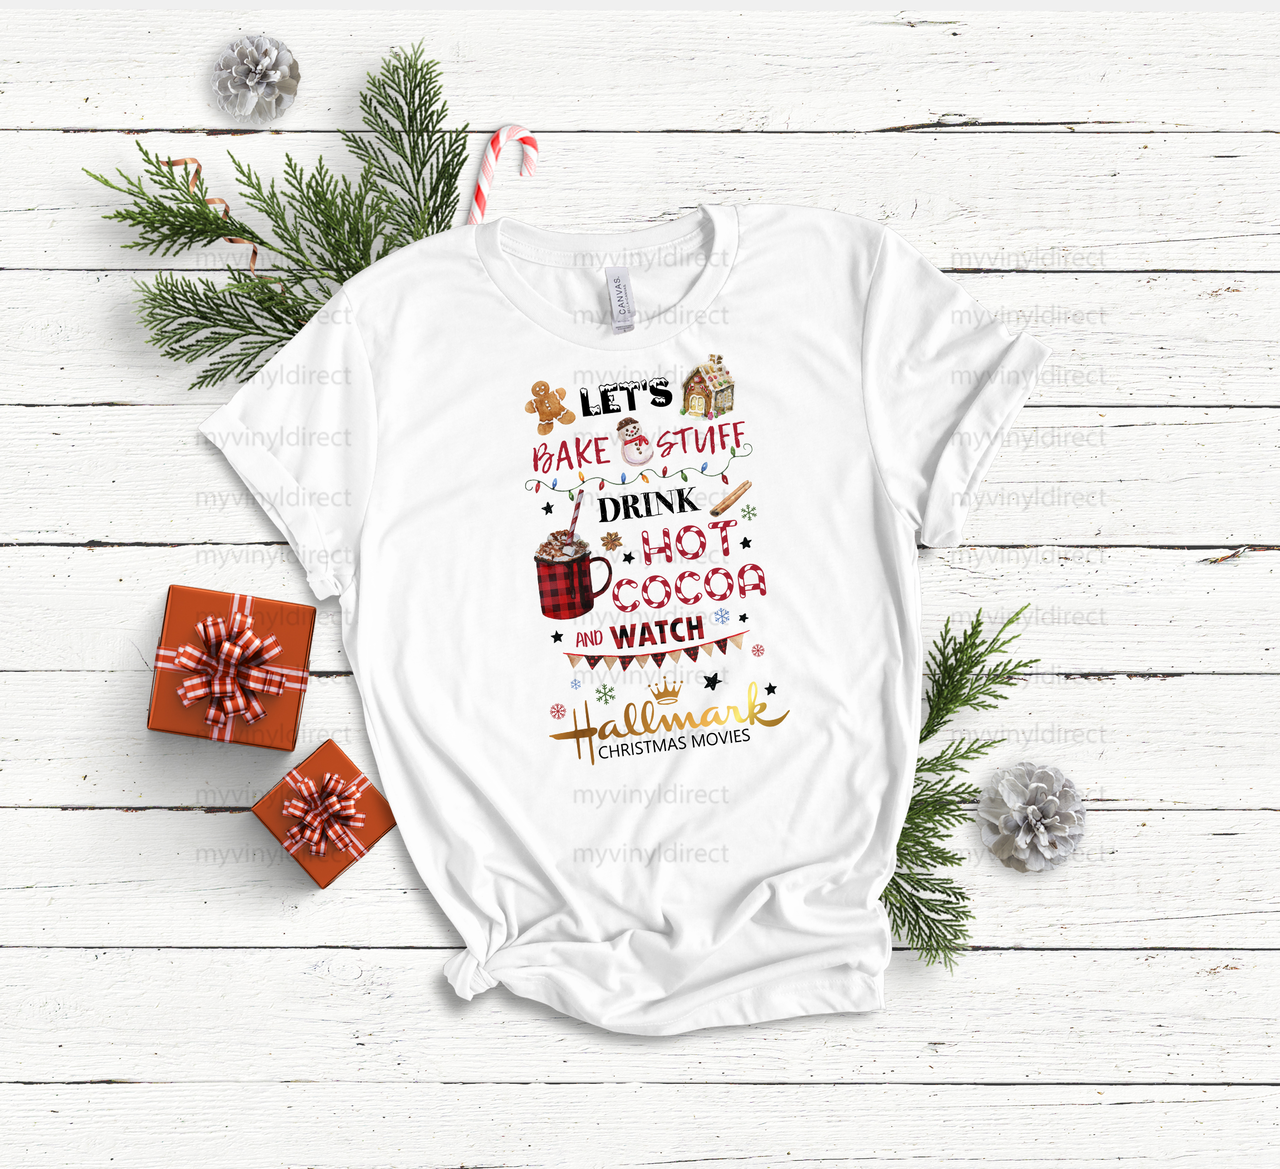 https://cdn11.bigcommerce.com/s-rh2x4yeq/images/stencil/1280x1280/products/1708/6186/lets_bake_stuff_drink_hot_cocoal_watch_hallmark_christmas_movies__59926.1543341823.png?c=2